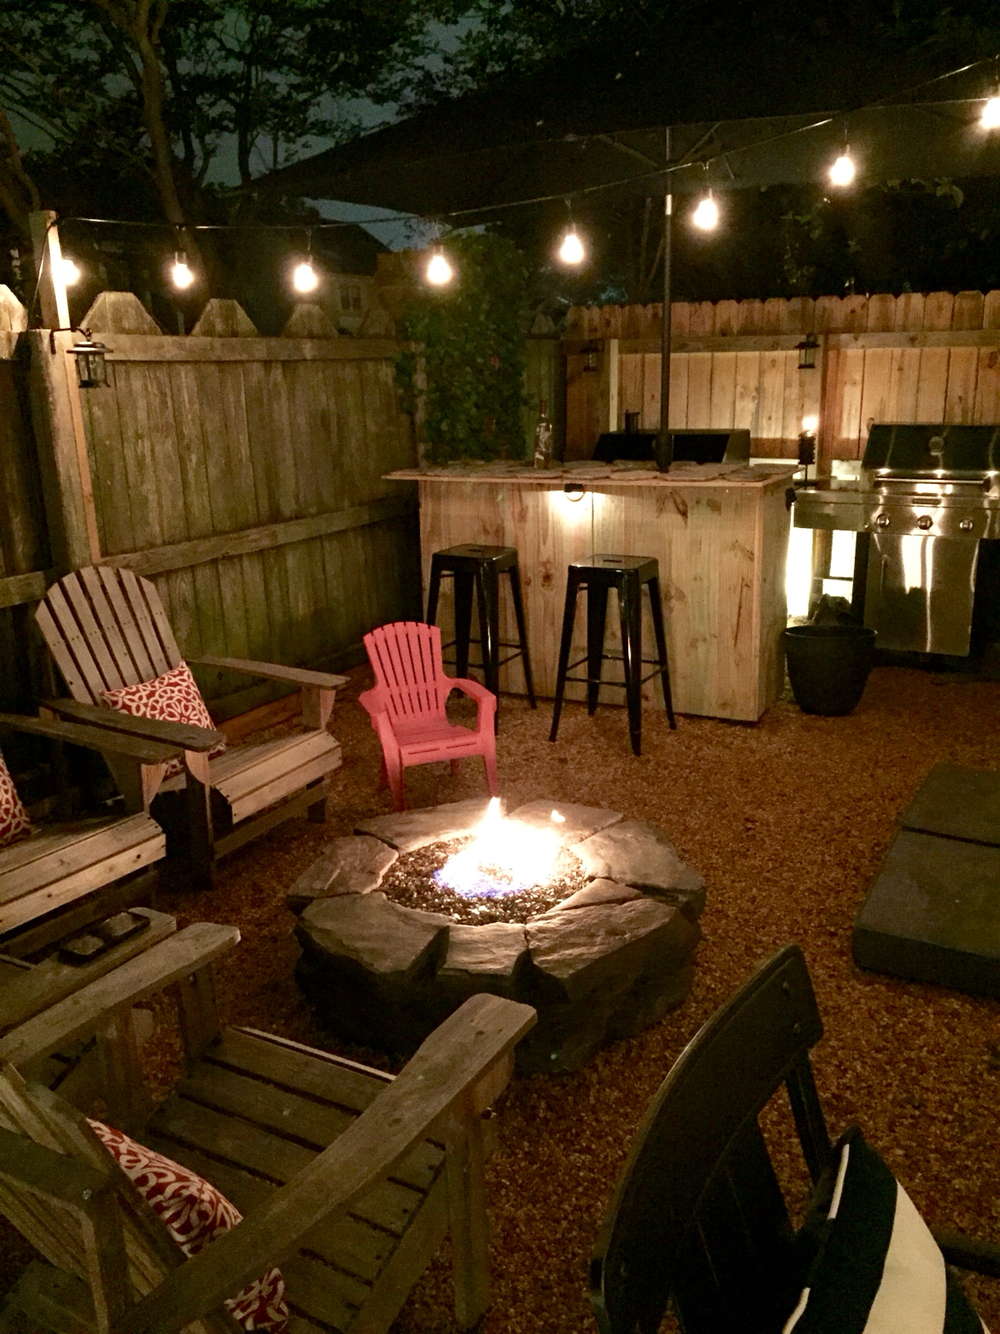 18 Fire Pit Ideas For Your Backyard - Best of DIY Ideas